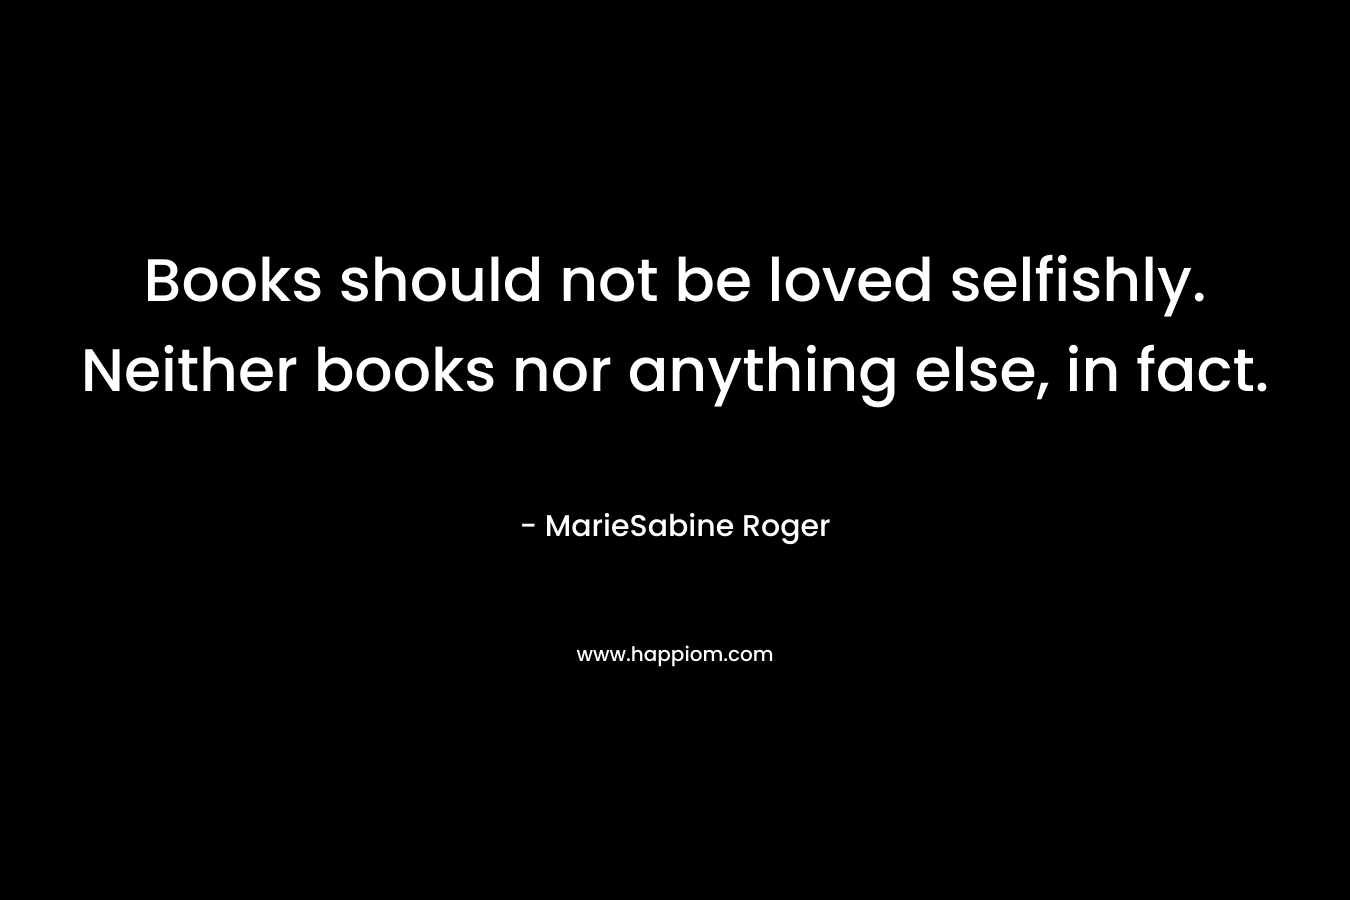 Books should not be loved selfishly. Neither books nor anything else, in fact.